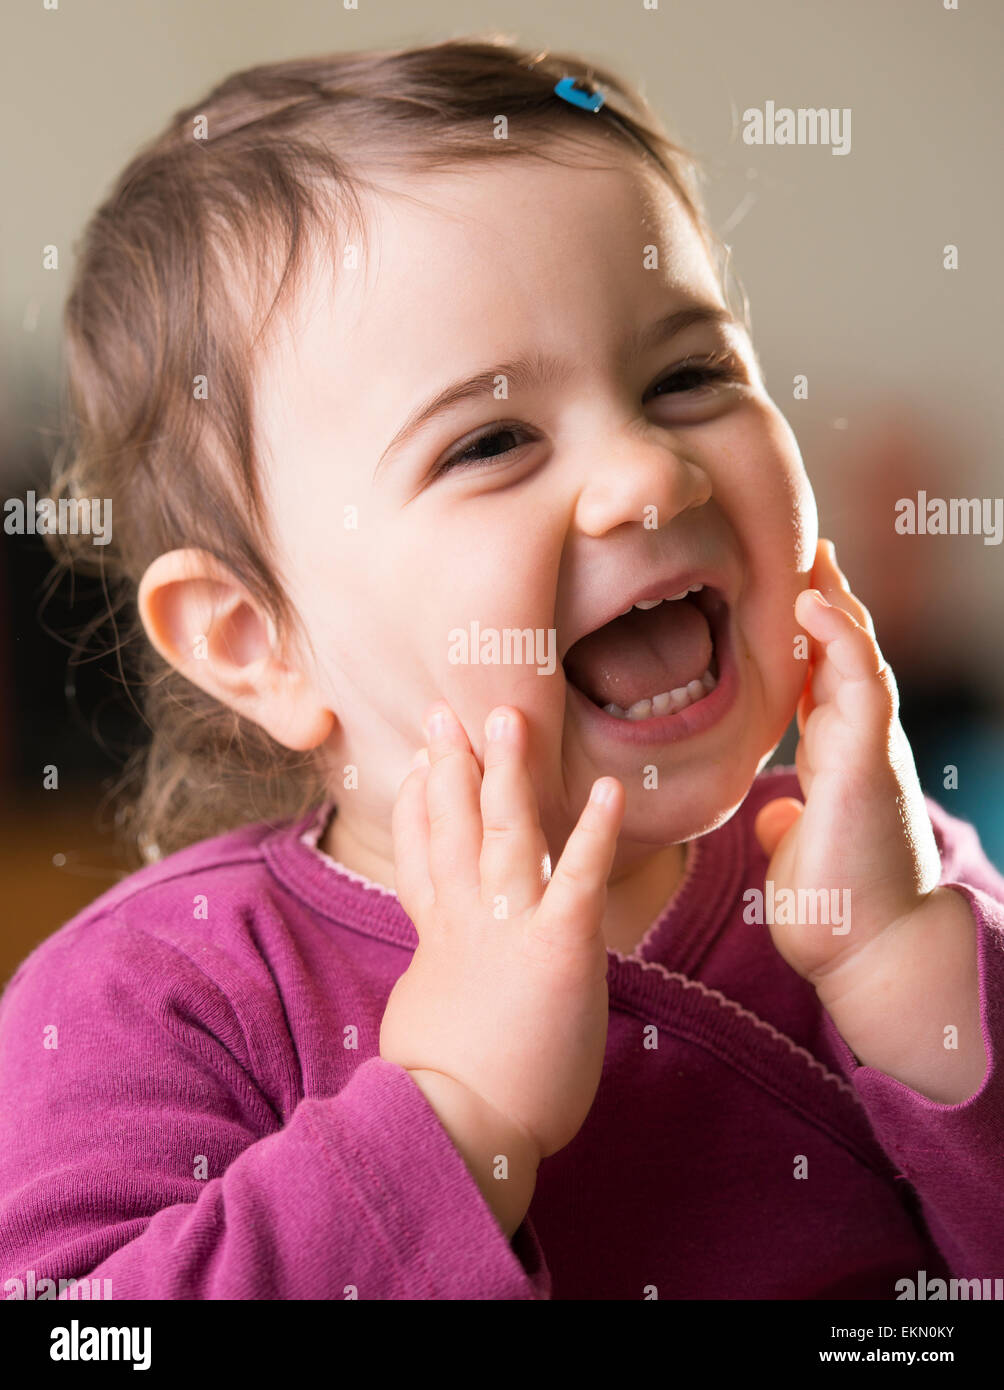 cute baby girl in purple looking aside laughing Stock Photo - Alamy